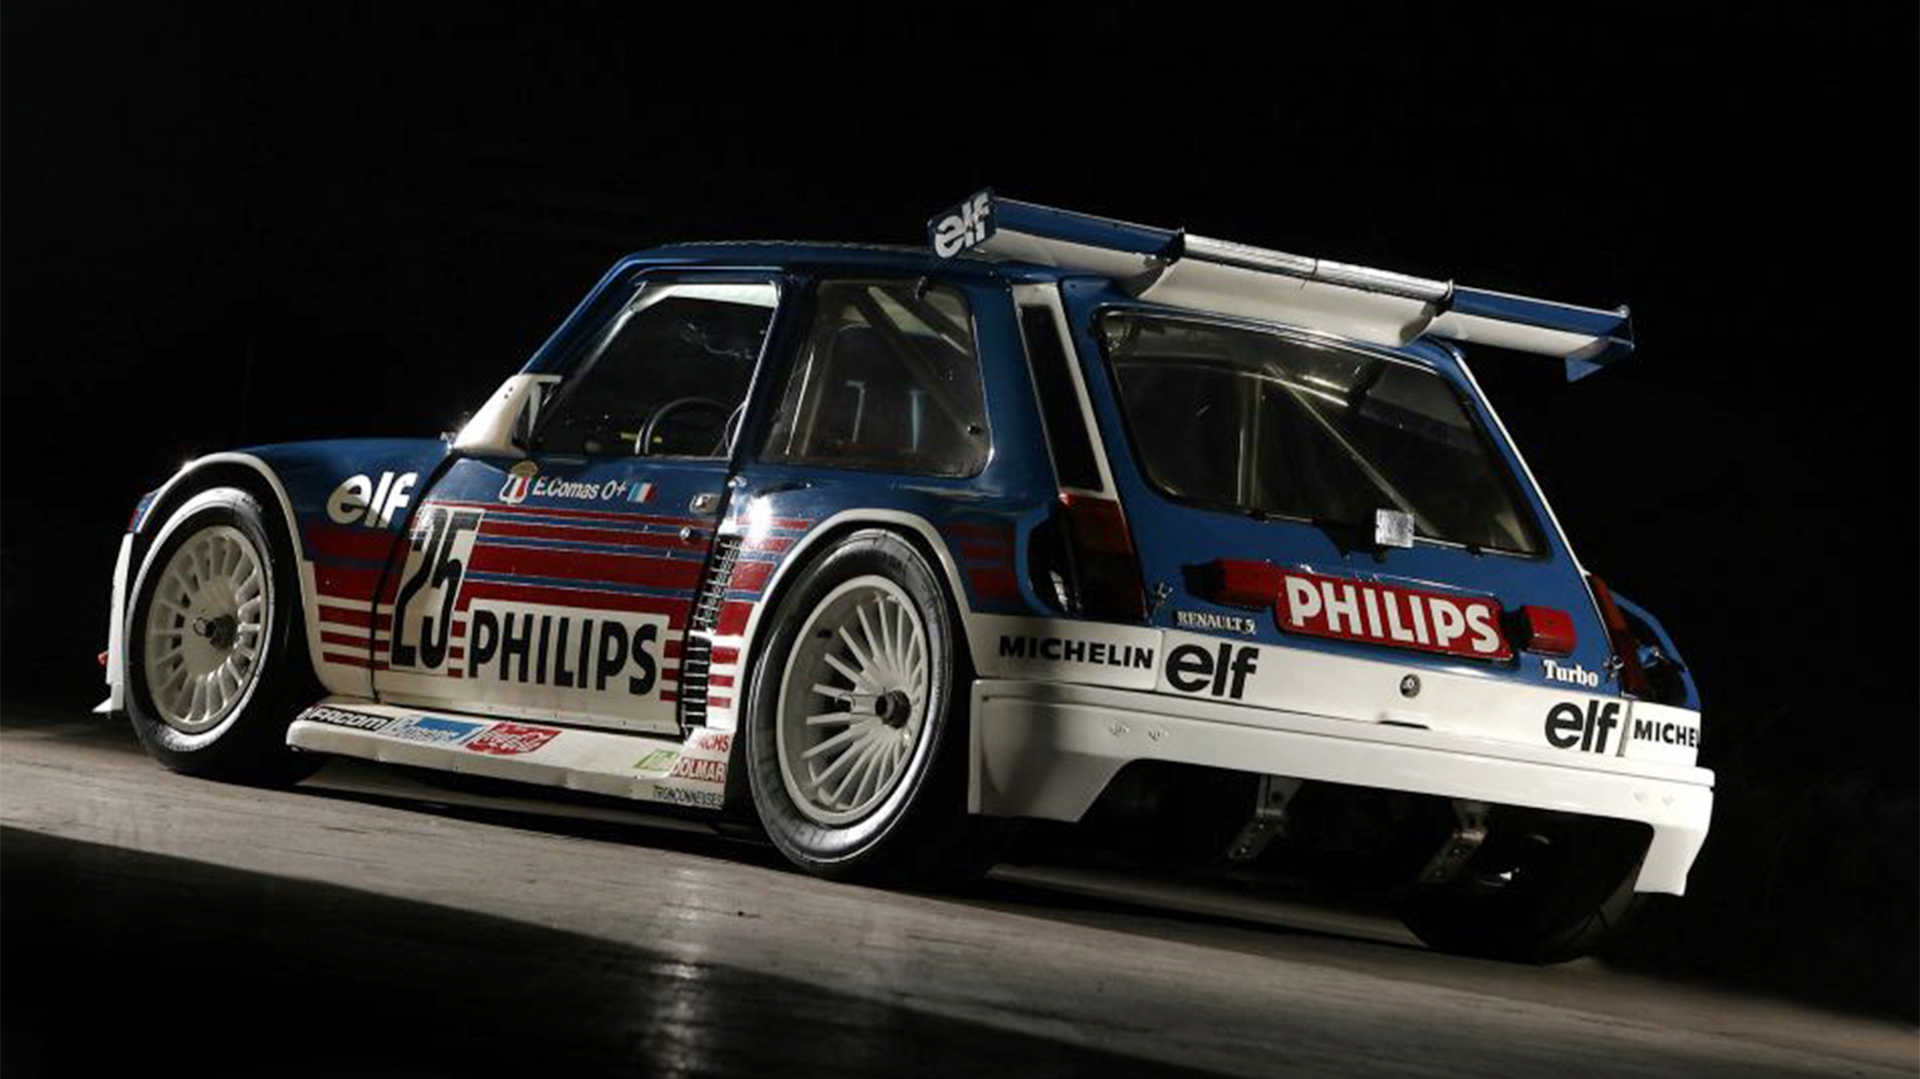 In The Mid-1980S, The Renault 5 Turbo Competed In The Silhouettes Category, The French Superturismo, And Had To Use A Larger Rear Spoiler To Match The Larger Models.